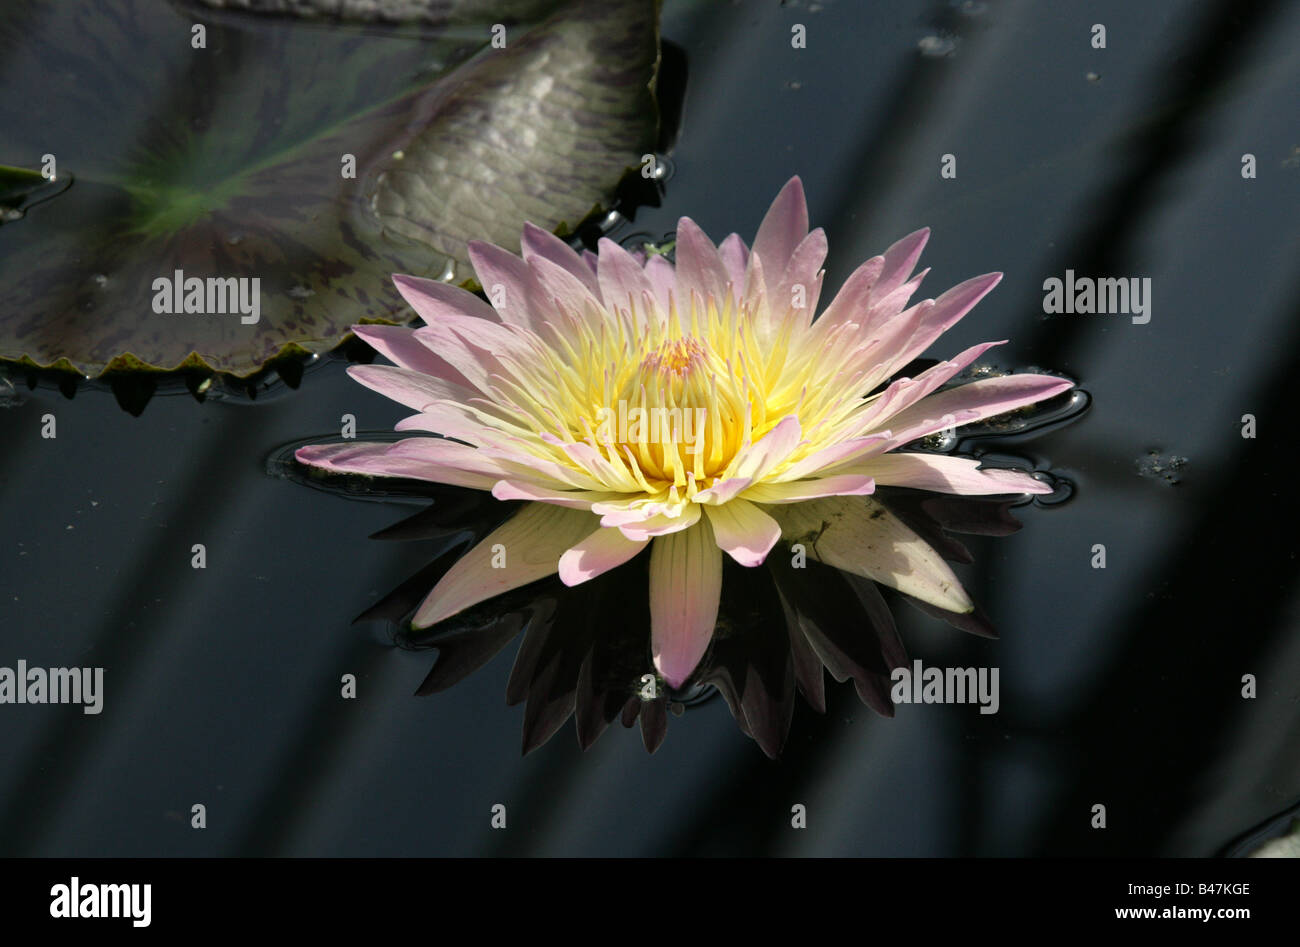 Water Lily, Nymphaea Day Glow, Nymphaeaceae Stock Photo